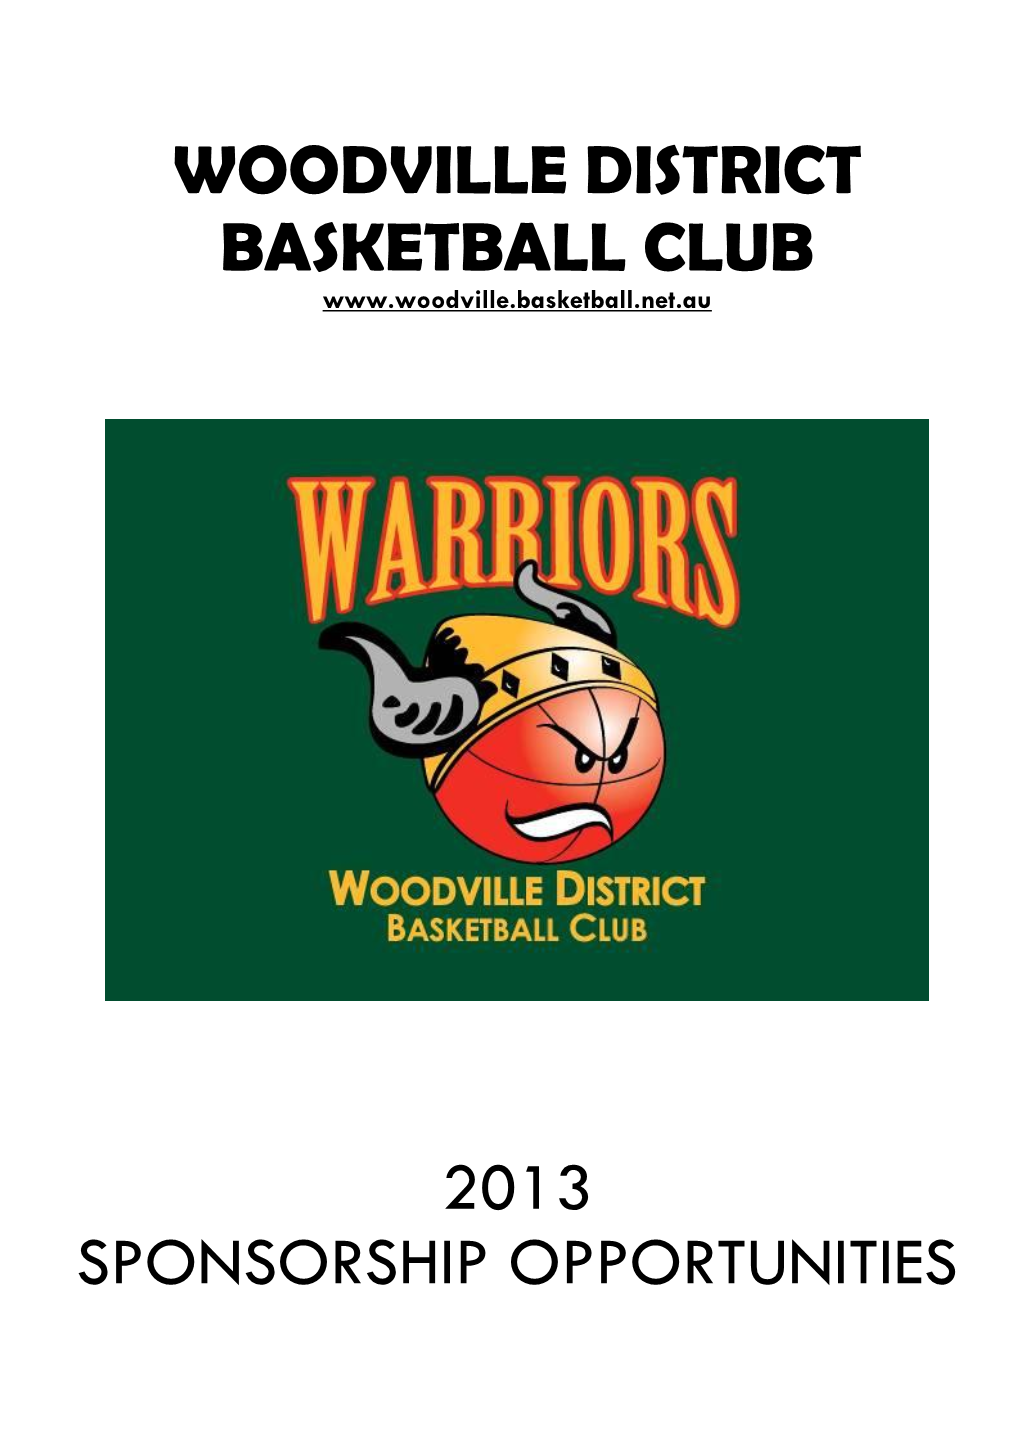 Woodville District Basketball Club